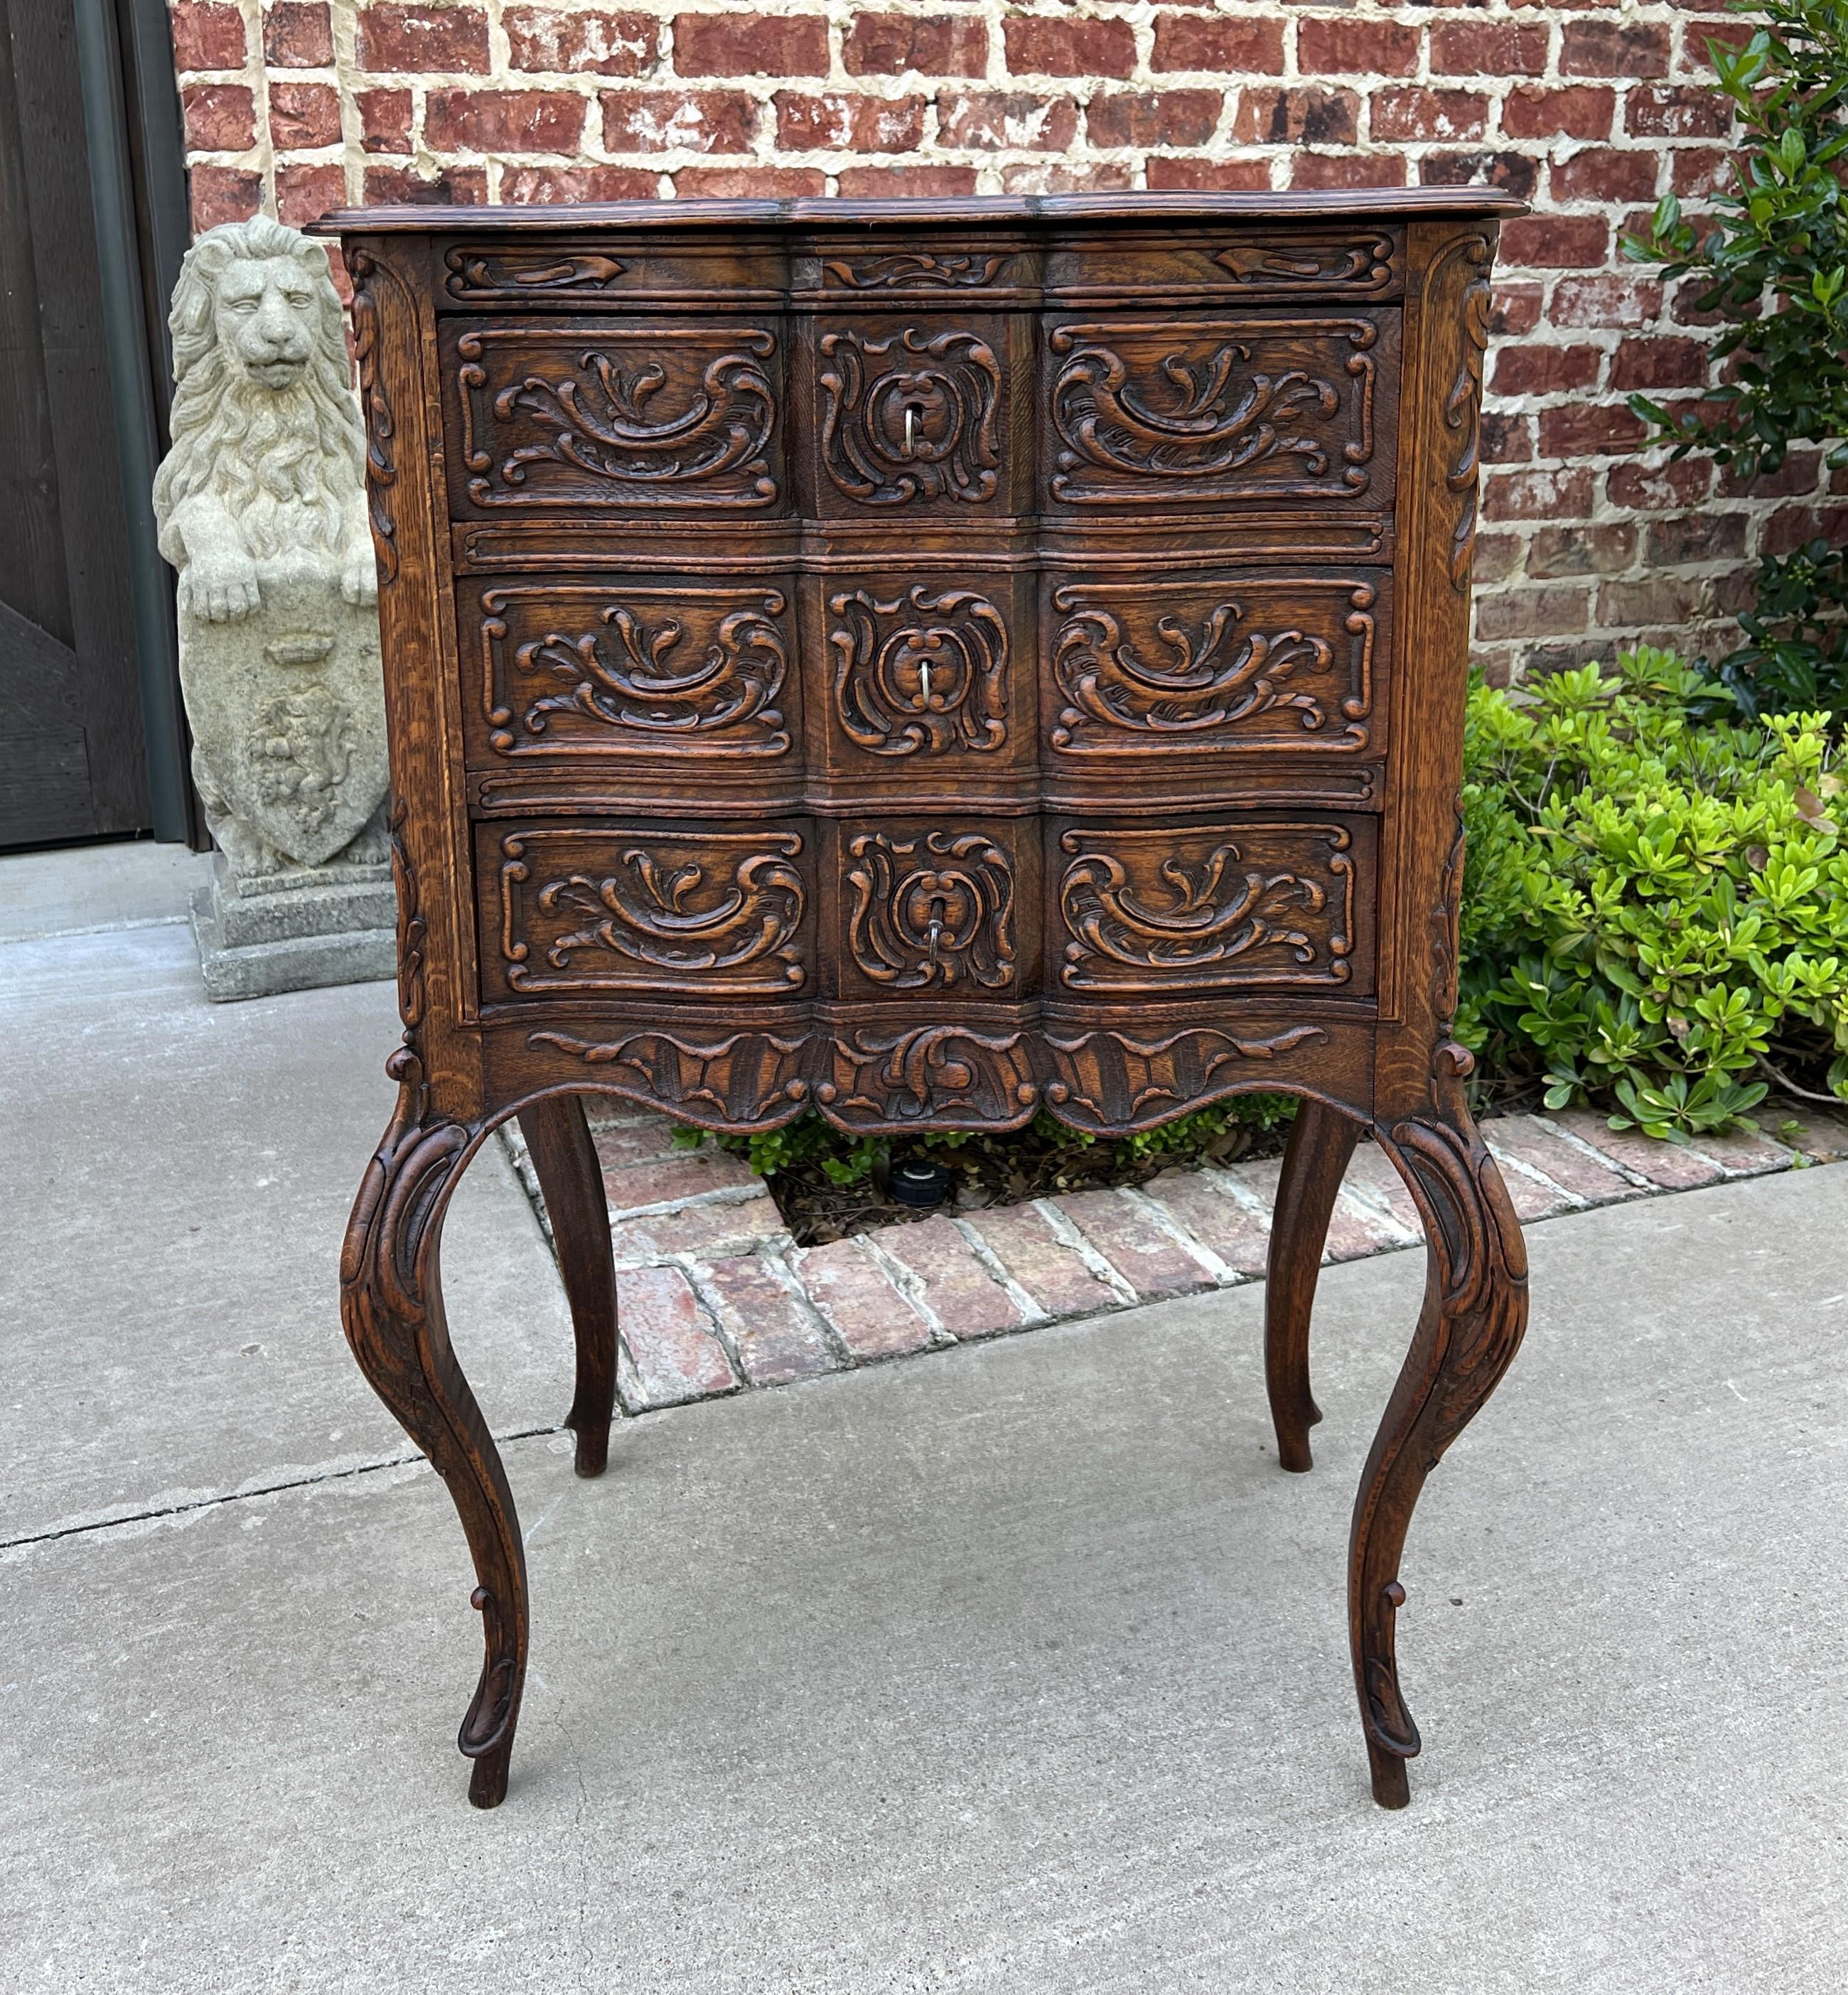 BEAUTIFUL Antique French Country Oak Chest of Drawers Lingerie Cabinet~~3 Drawers ~~HIGHLY CARVED Serpentine Front~~3 Keys~~Pegged~~ c.1920s

This is a WONDERFUL example of an antique classic French Country oak chest of drawers~~serpentine carved